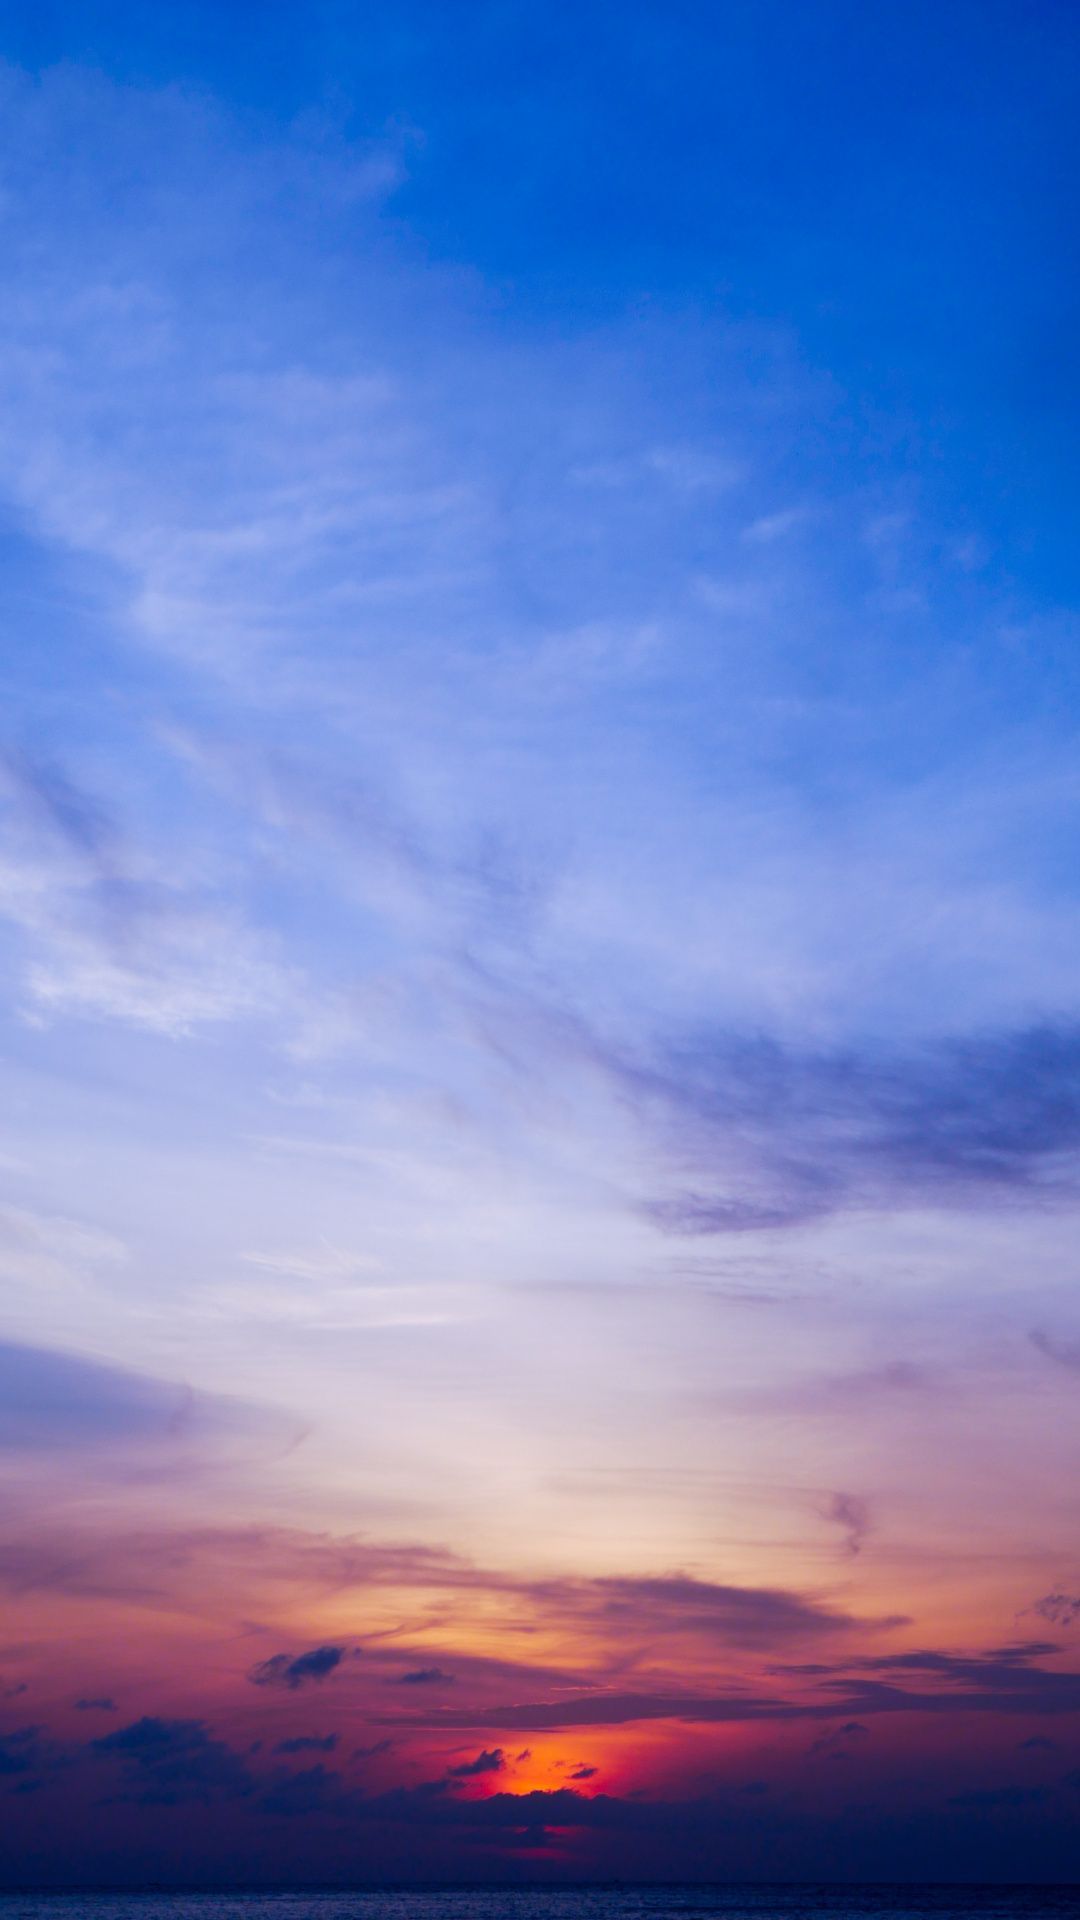 Sunset, colorful, sky wallpaper. iPhone background nature, iPhone wallpaper sky, Beautiful nature wallpaper